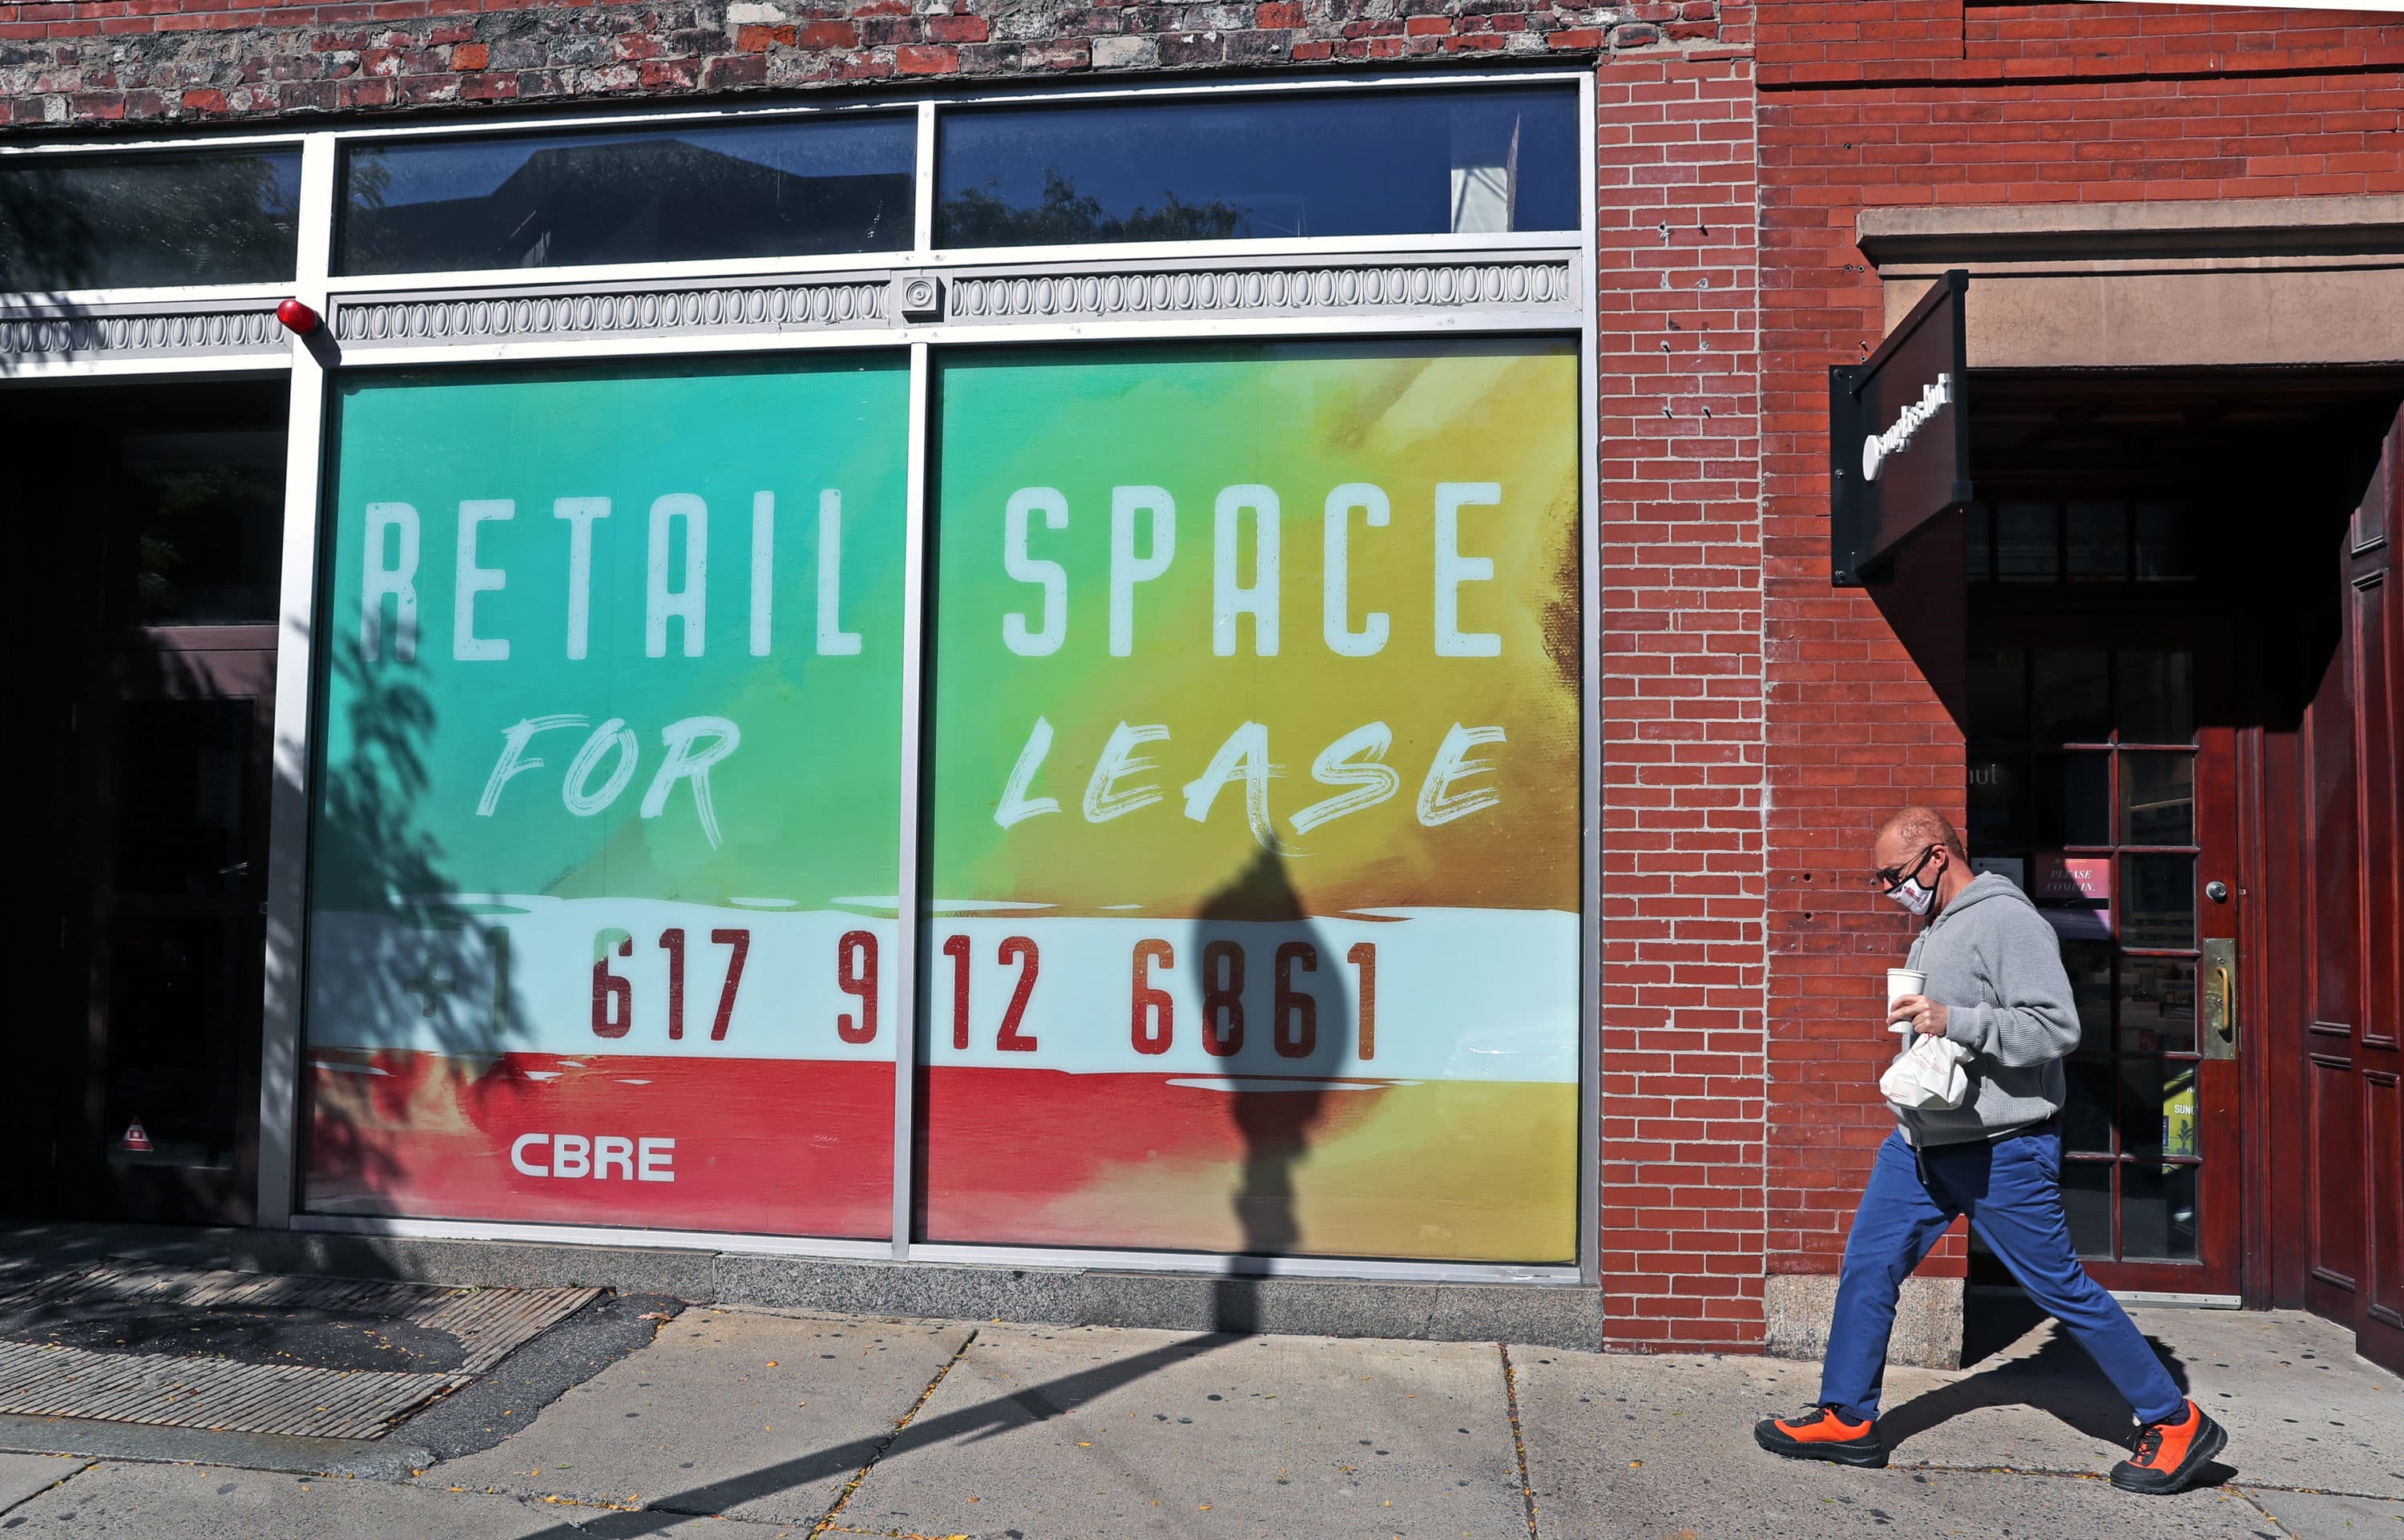 Retail space still for lease in Boston, pictured on Oct. 8, 2020. (David L. Ryan/The Boston Globe via Getty Images)